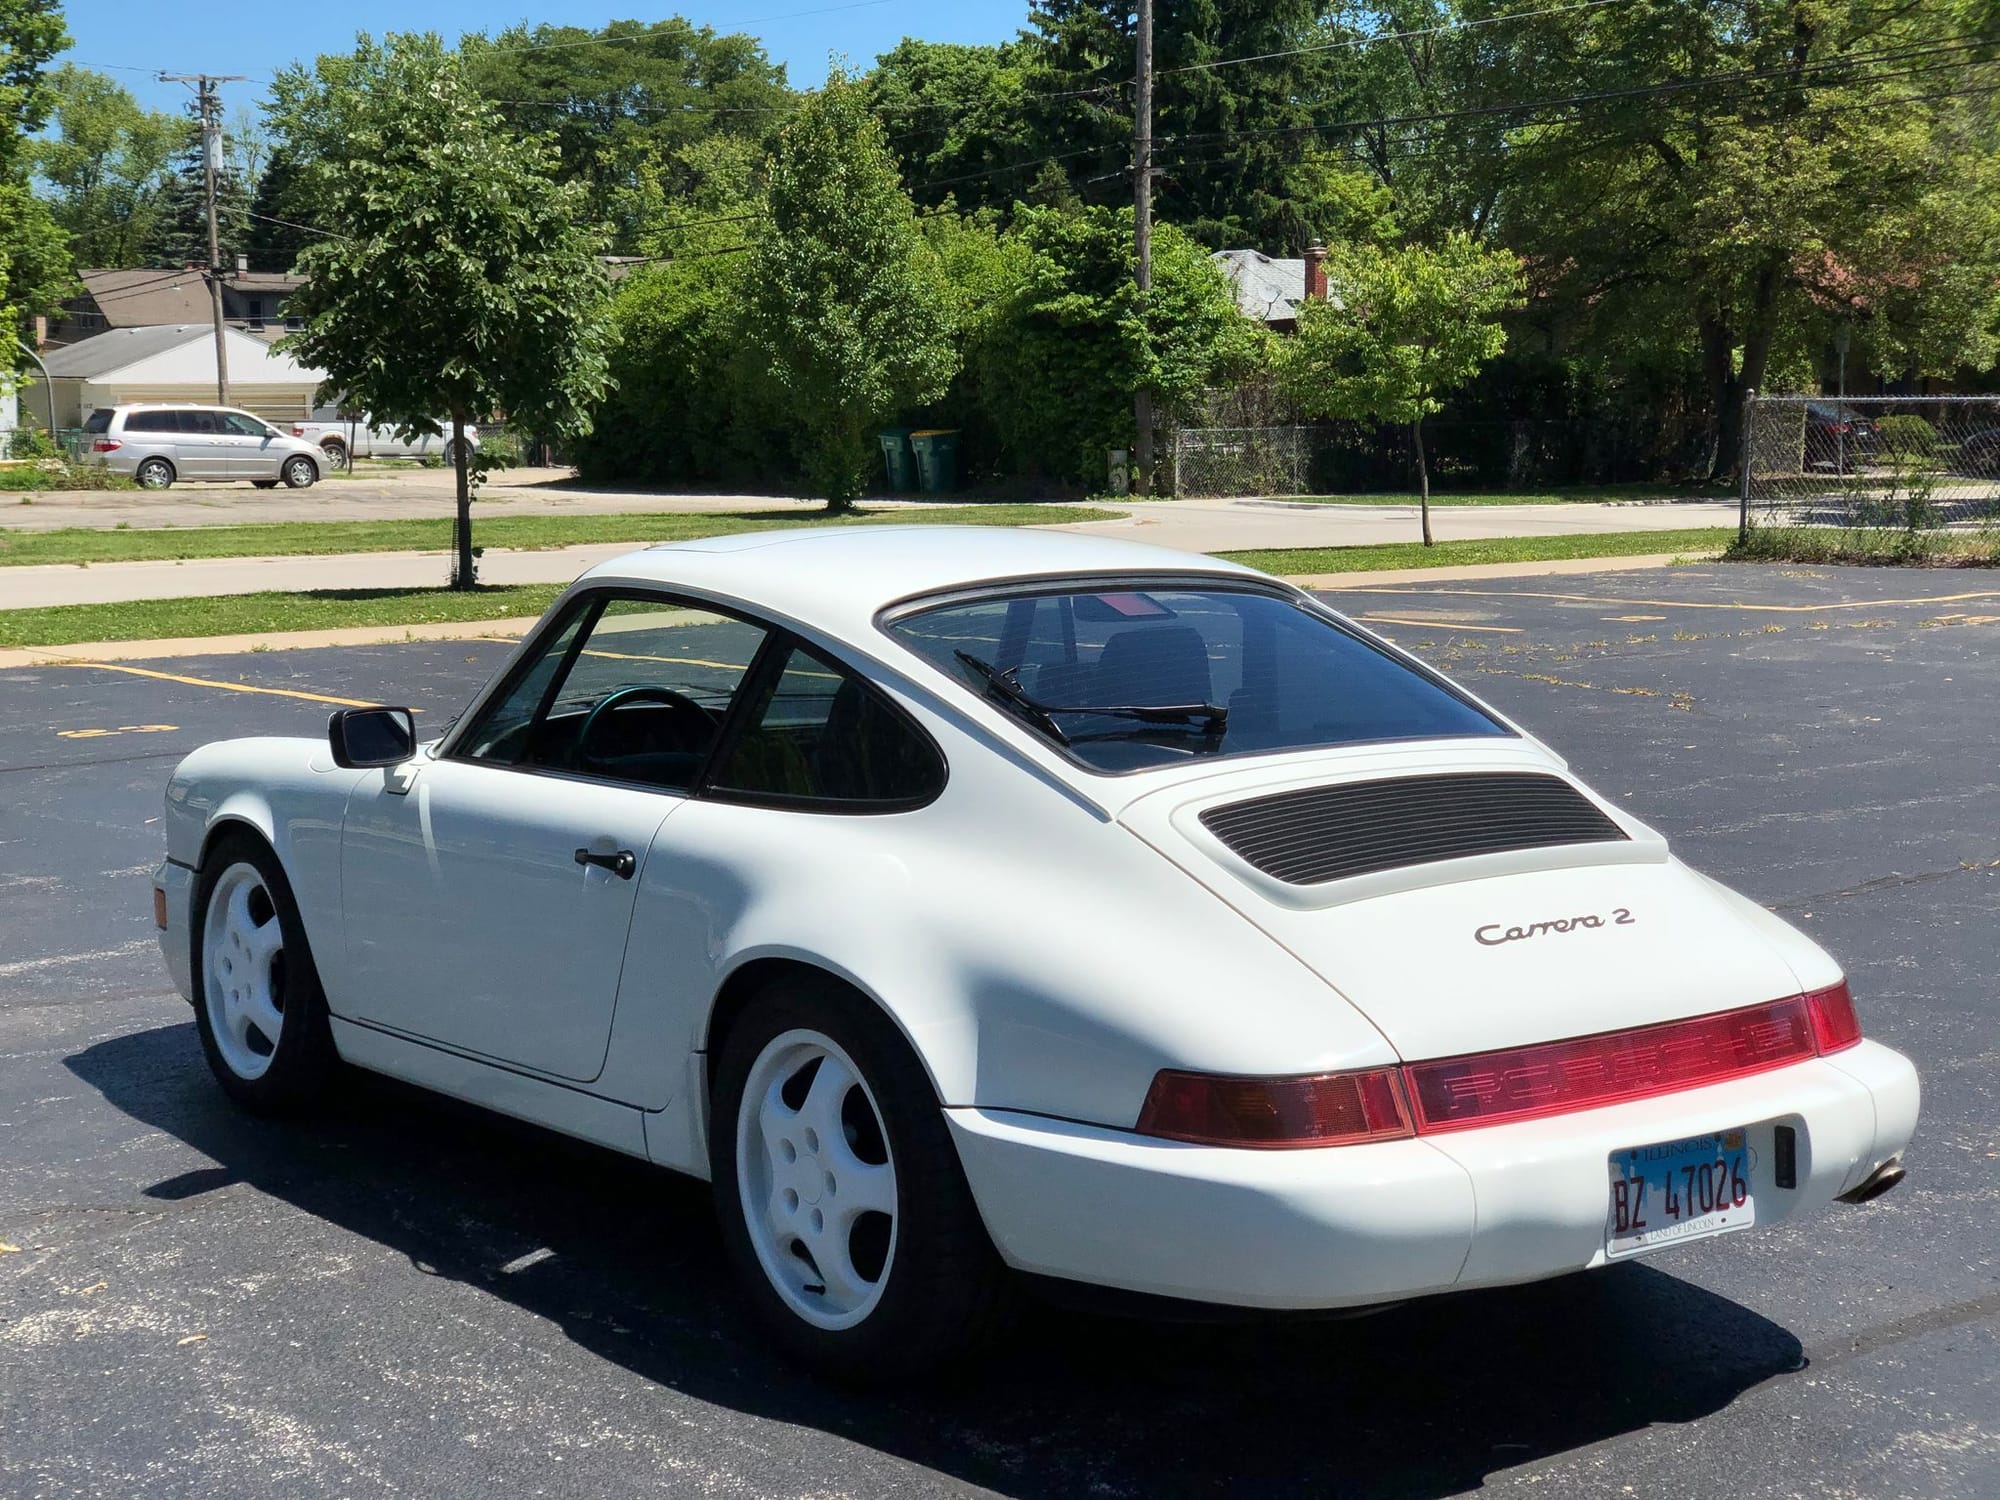 1991 Porsche 911 - 1991 Porsche 911 C2 Manual - Used - VIN WP0AB2967MS410693 - 95,100 Miles - 6 cyl - 2WD - Manual - Coupe - White - Westmont, IL 60559, United States